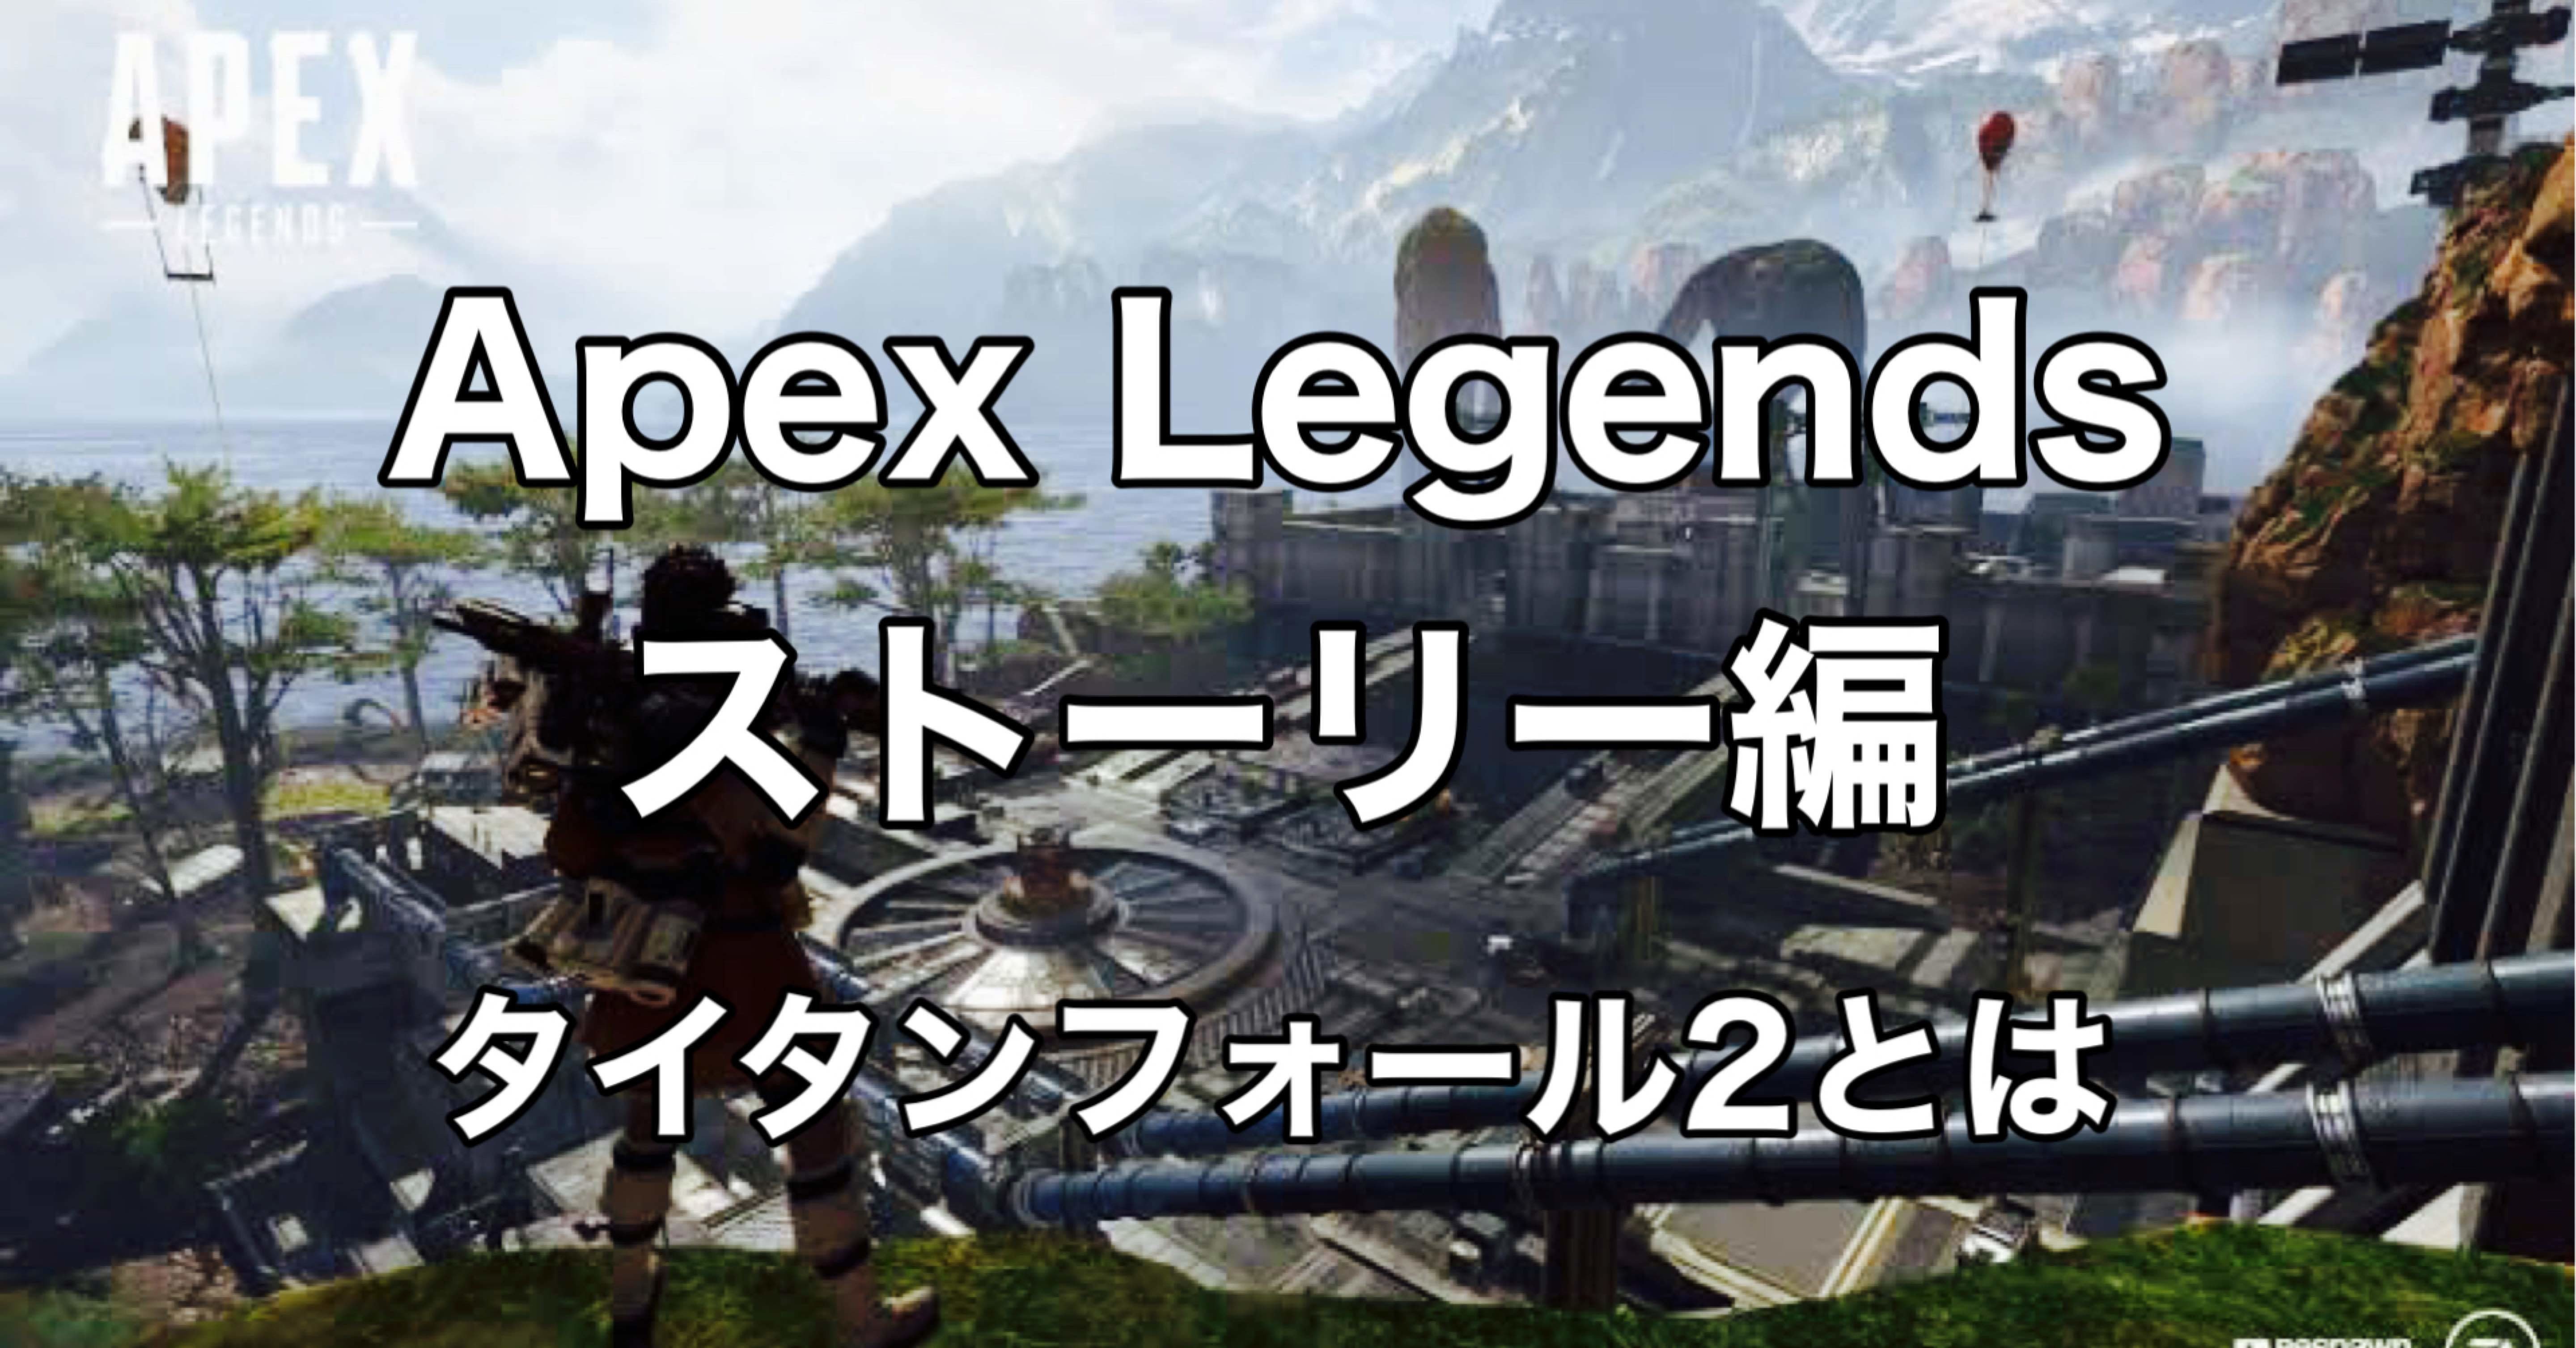 Apex Legends ストーリー編 タイタンフォール２ Hys ひす ゲームnote Note